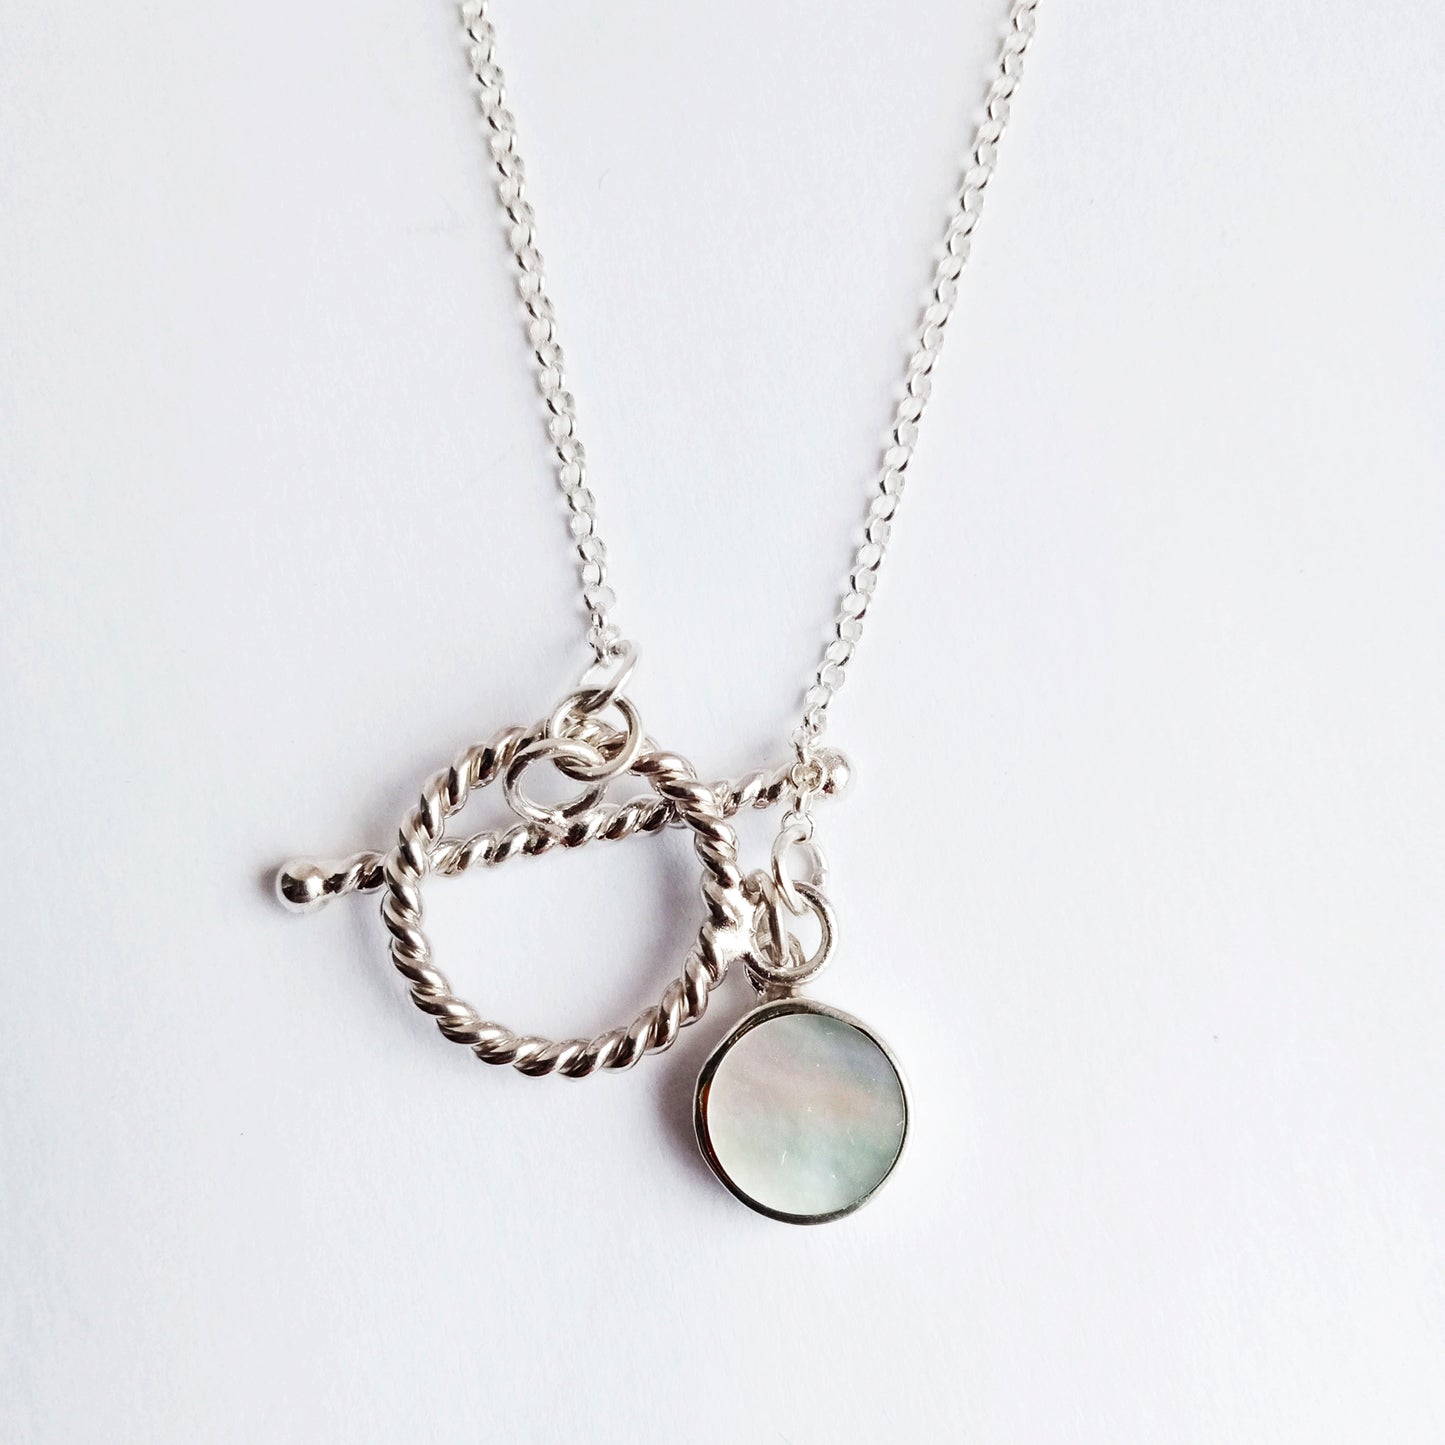 Mini Mother of Pearl Silver 925 Fob Necklace